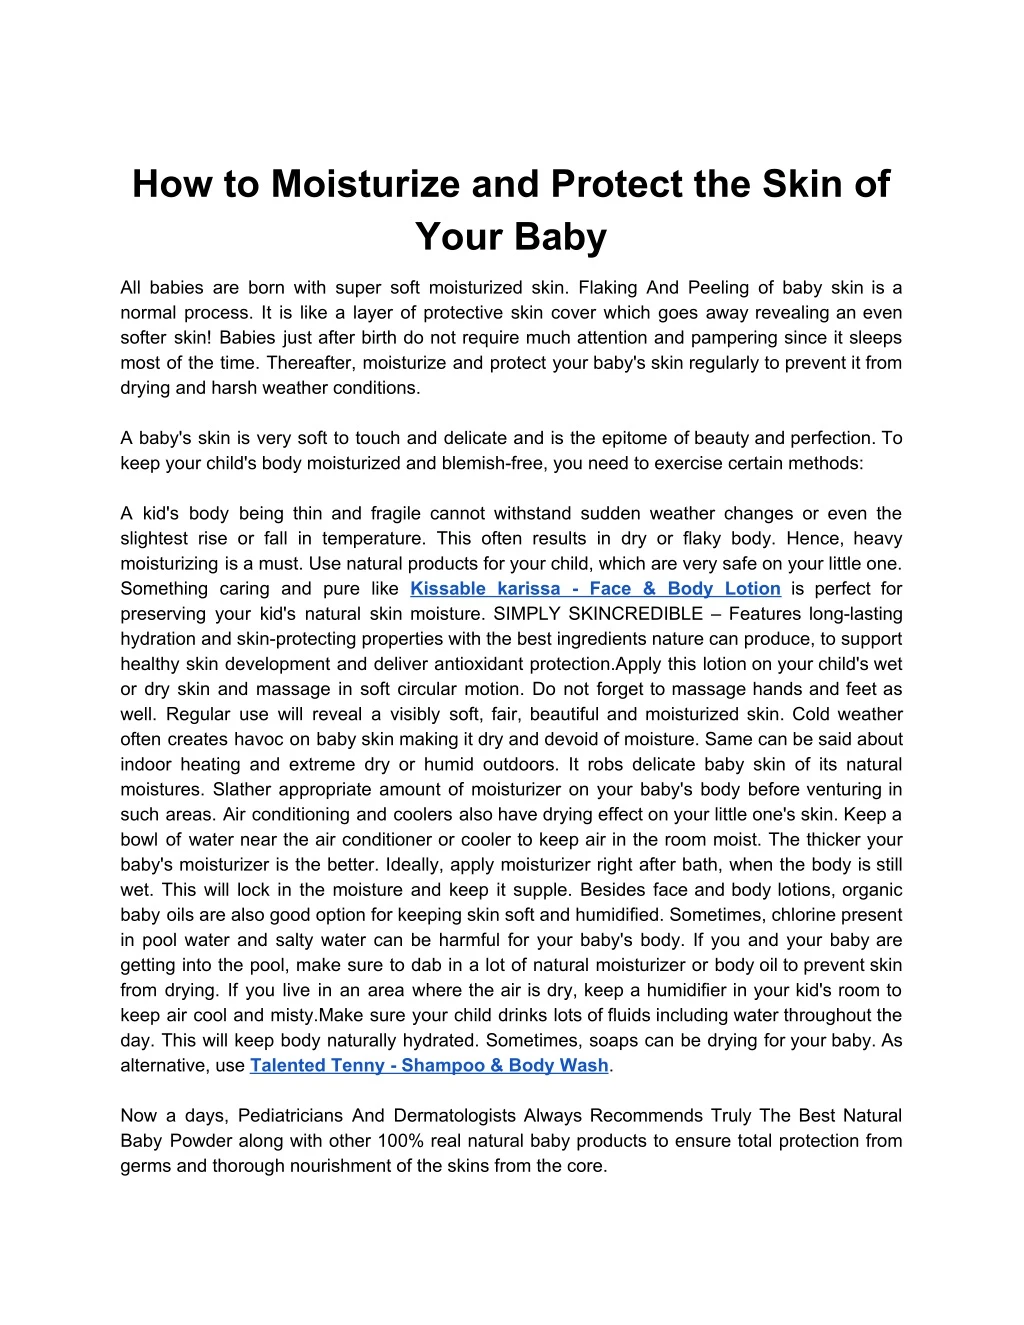 how to moisturize and protect the skin of your